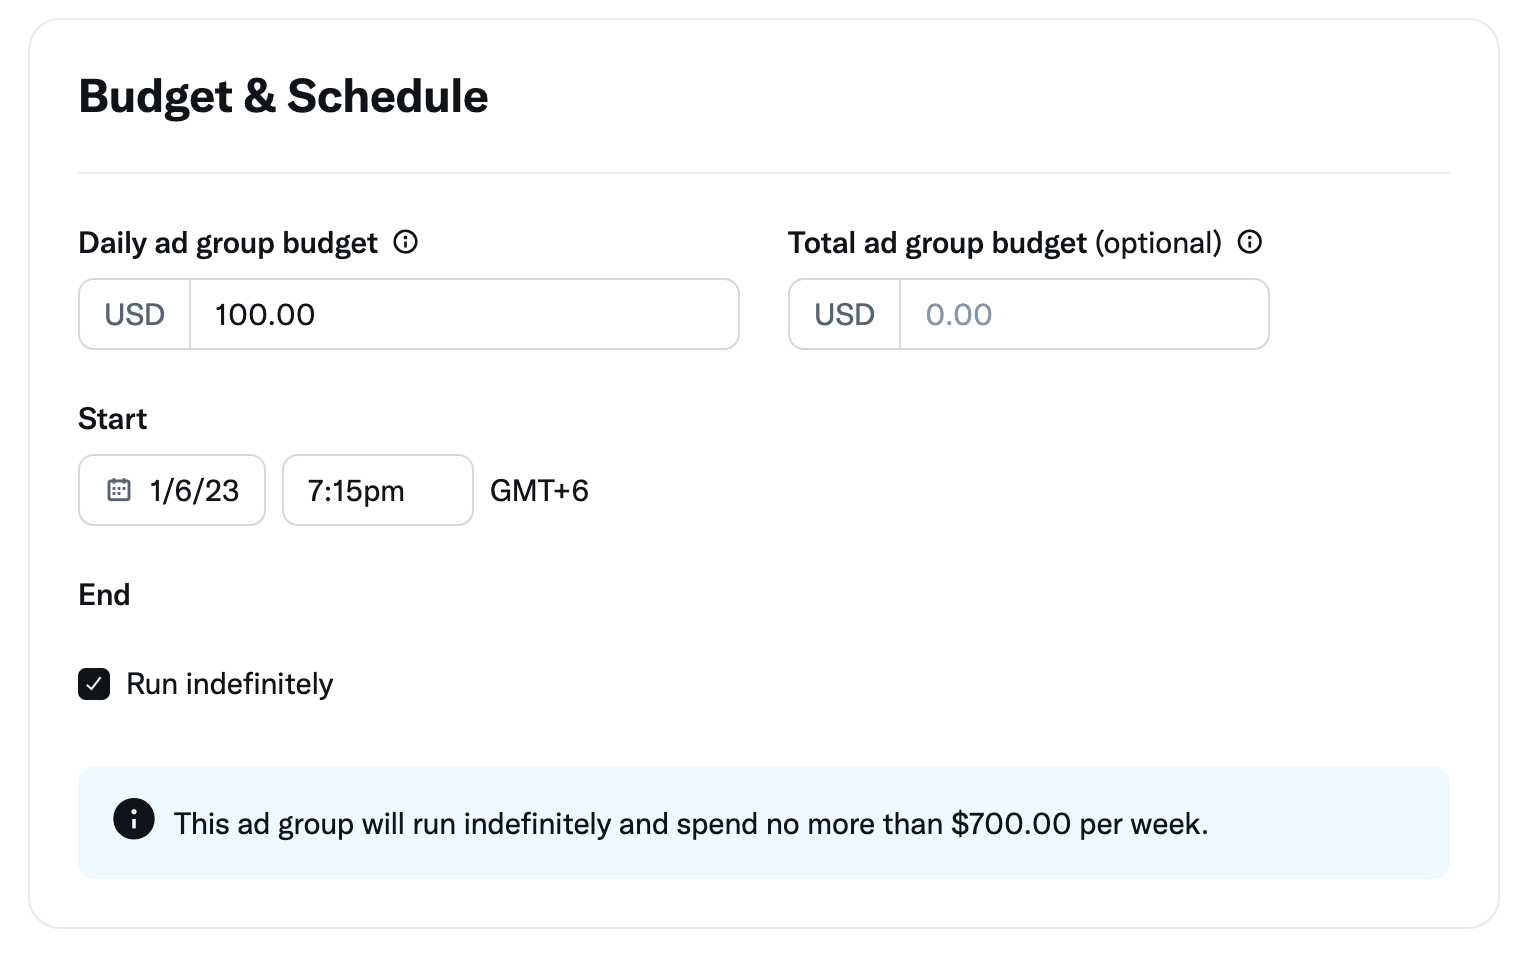 A screenshot of the Twitter ad interface's budget and schedule page, where users can define the daily and total ad group budgets as well as the duration of the campaign.